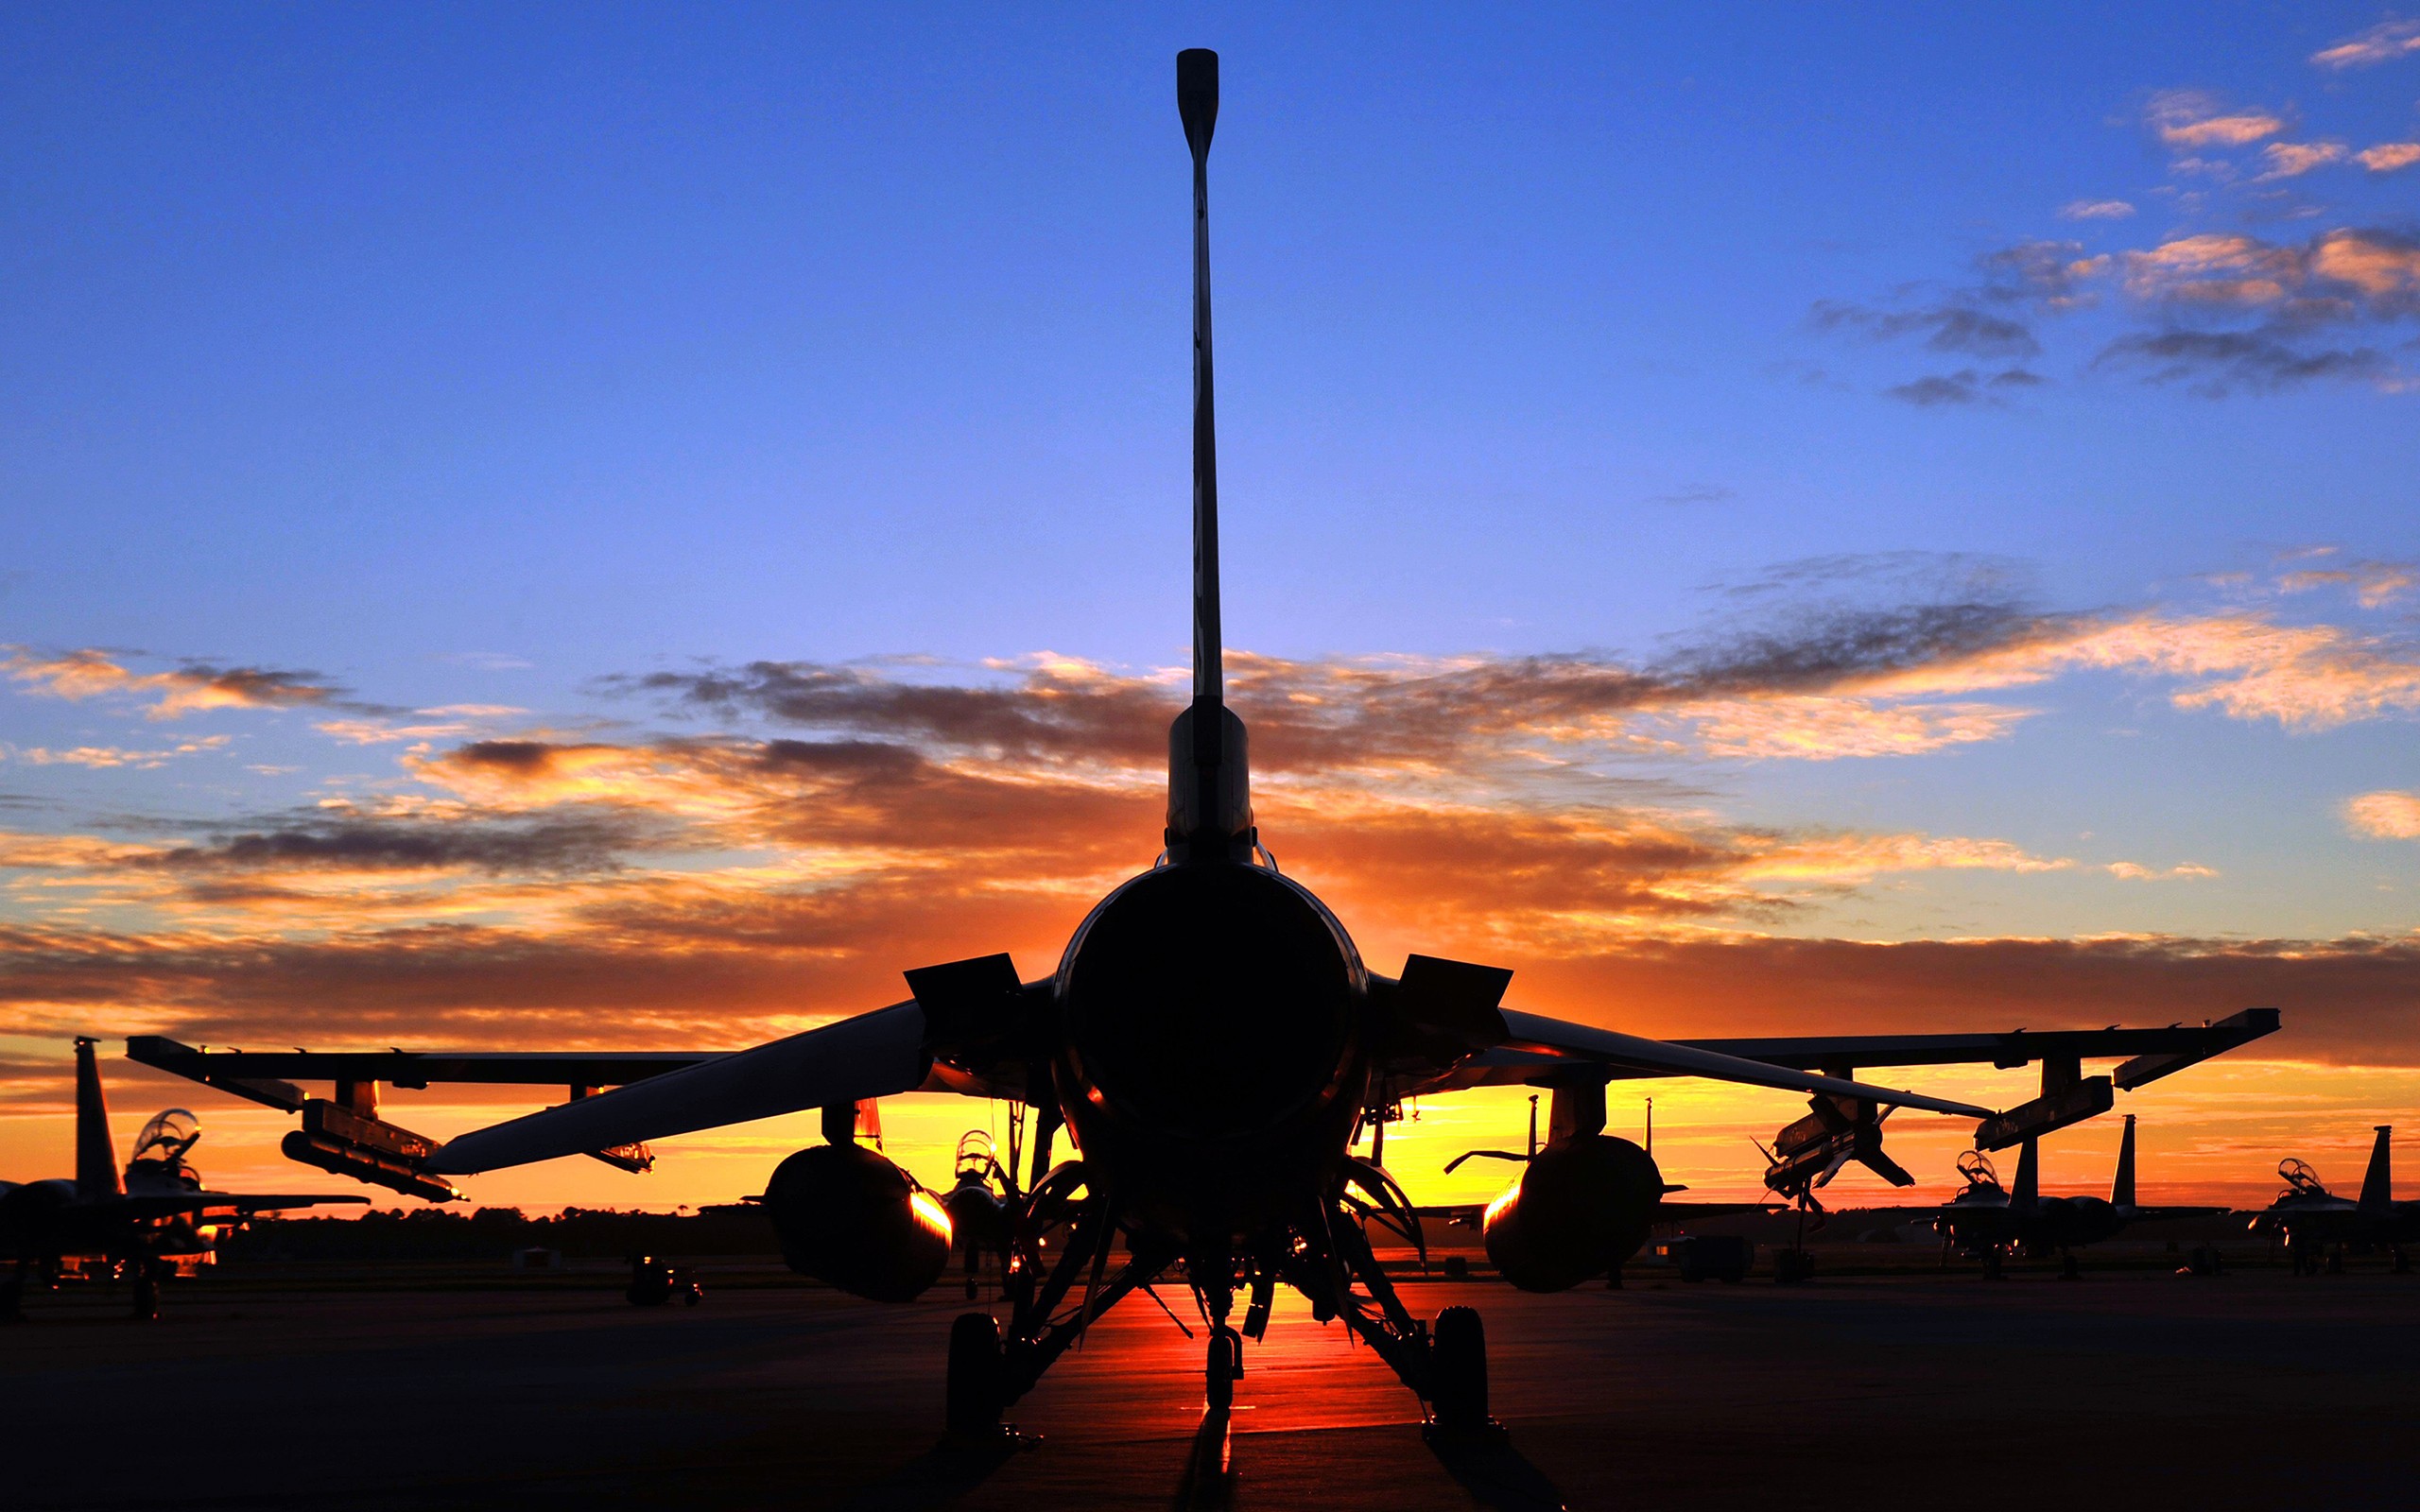 General 2560x1600 General Dynamics F-16 Fighting Falcon military aircraft aircraft vehicle silhouette sunlight military vehicle General Dynamics military sunset American aircraft sunset glow orange sky